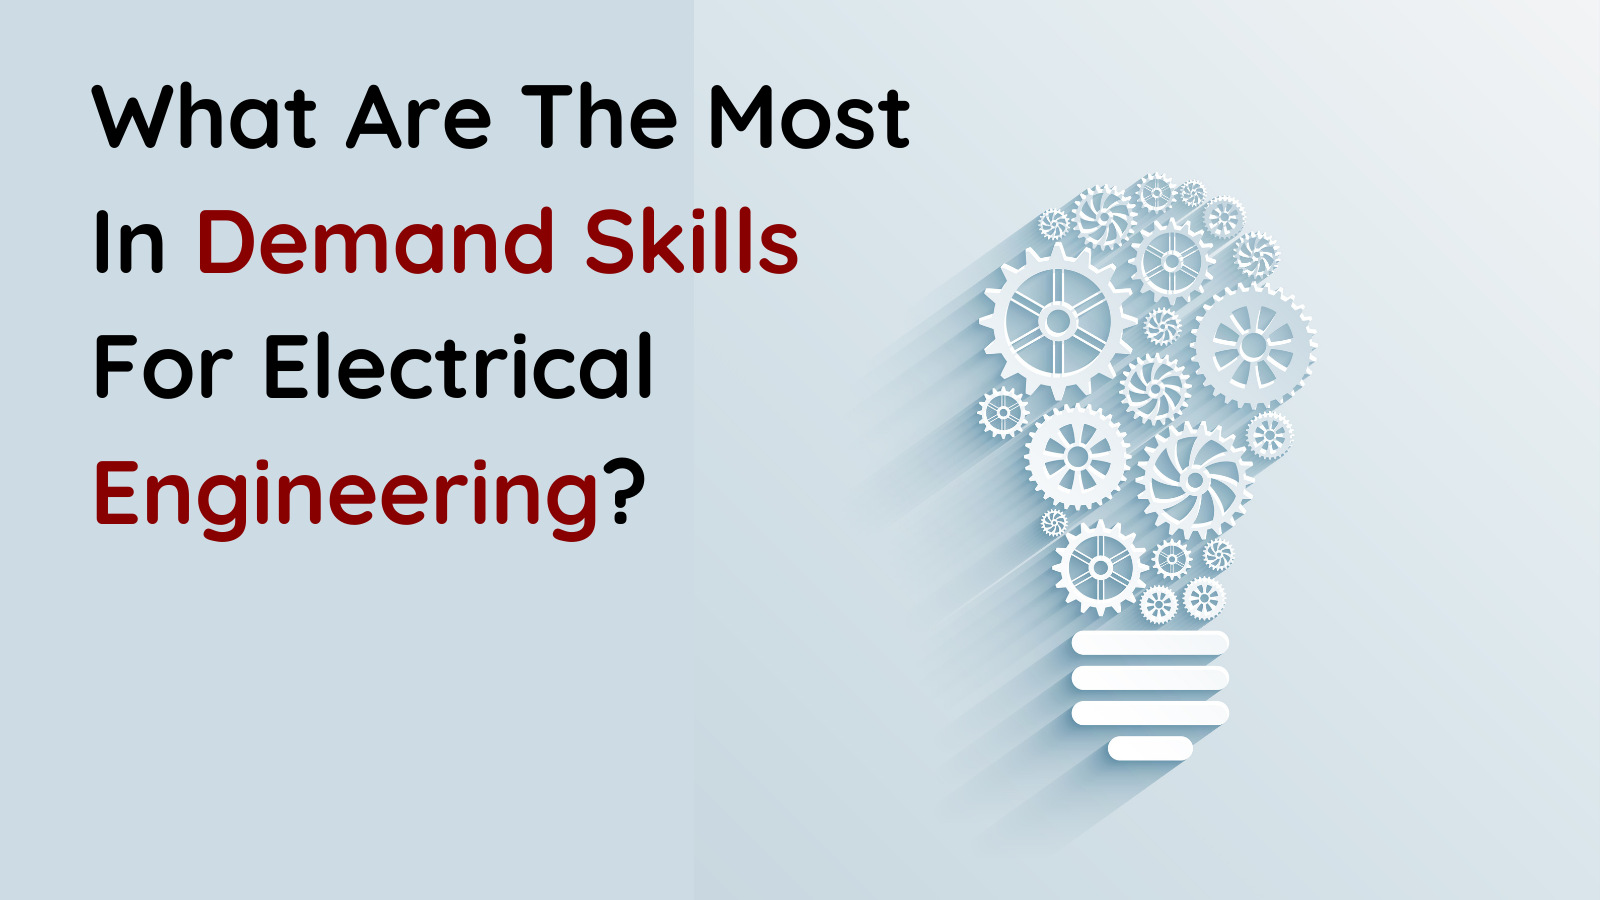 Skills For Electrical Engineering